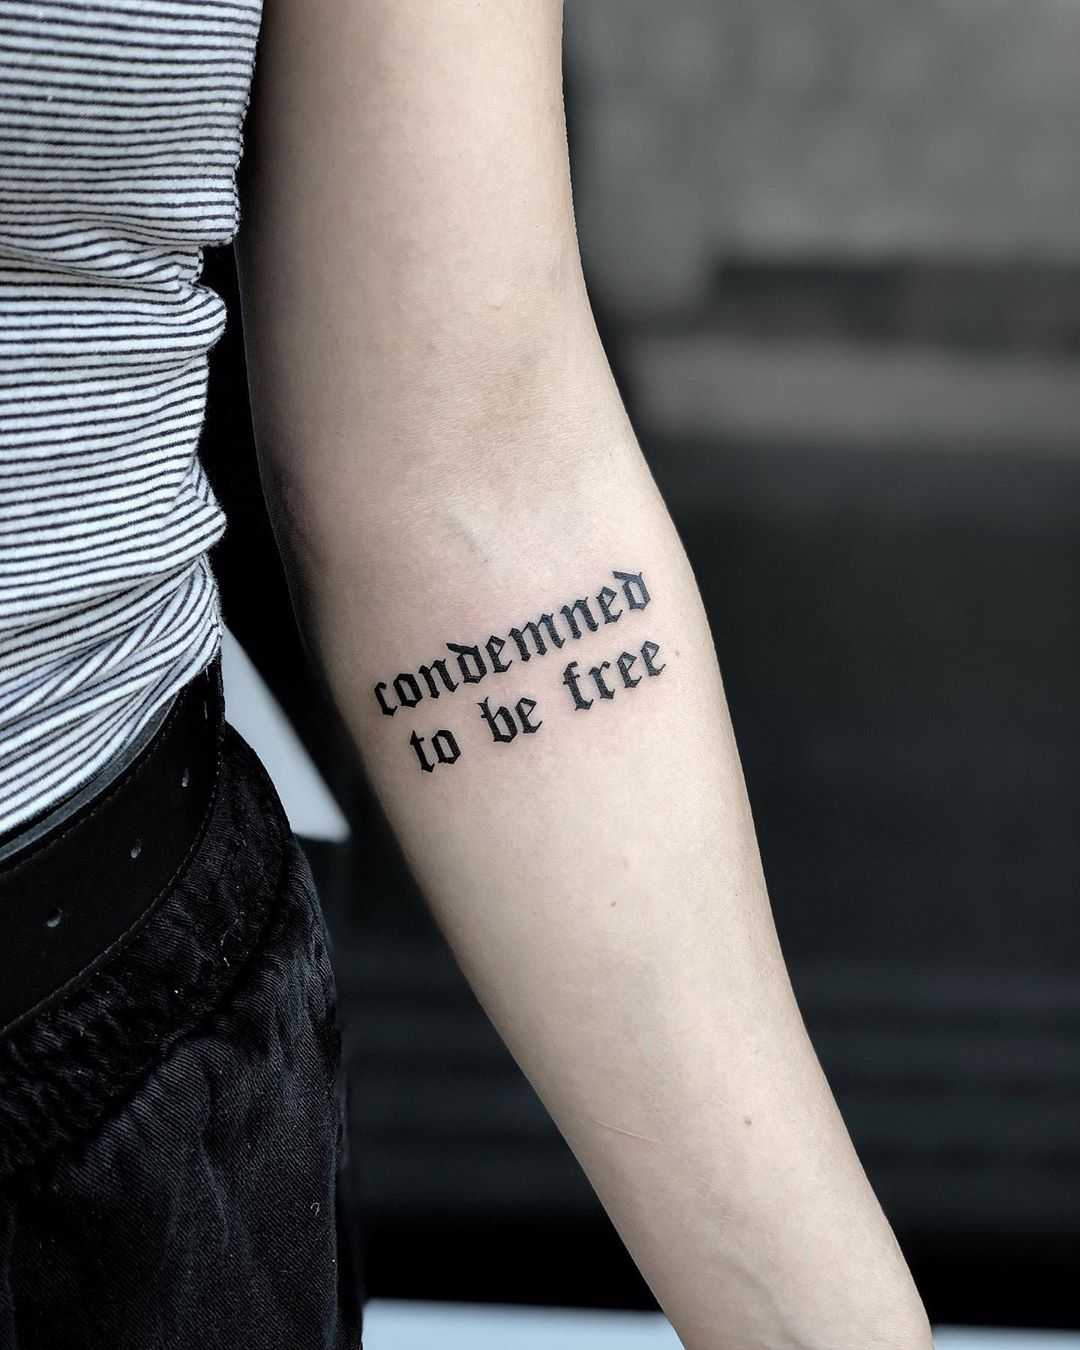 Condemned to be free tattoo by Loz McLean